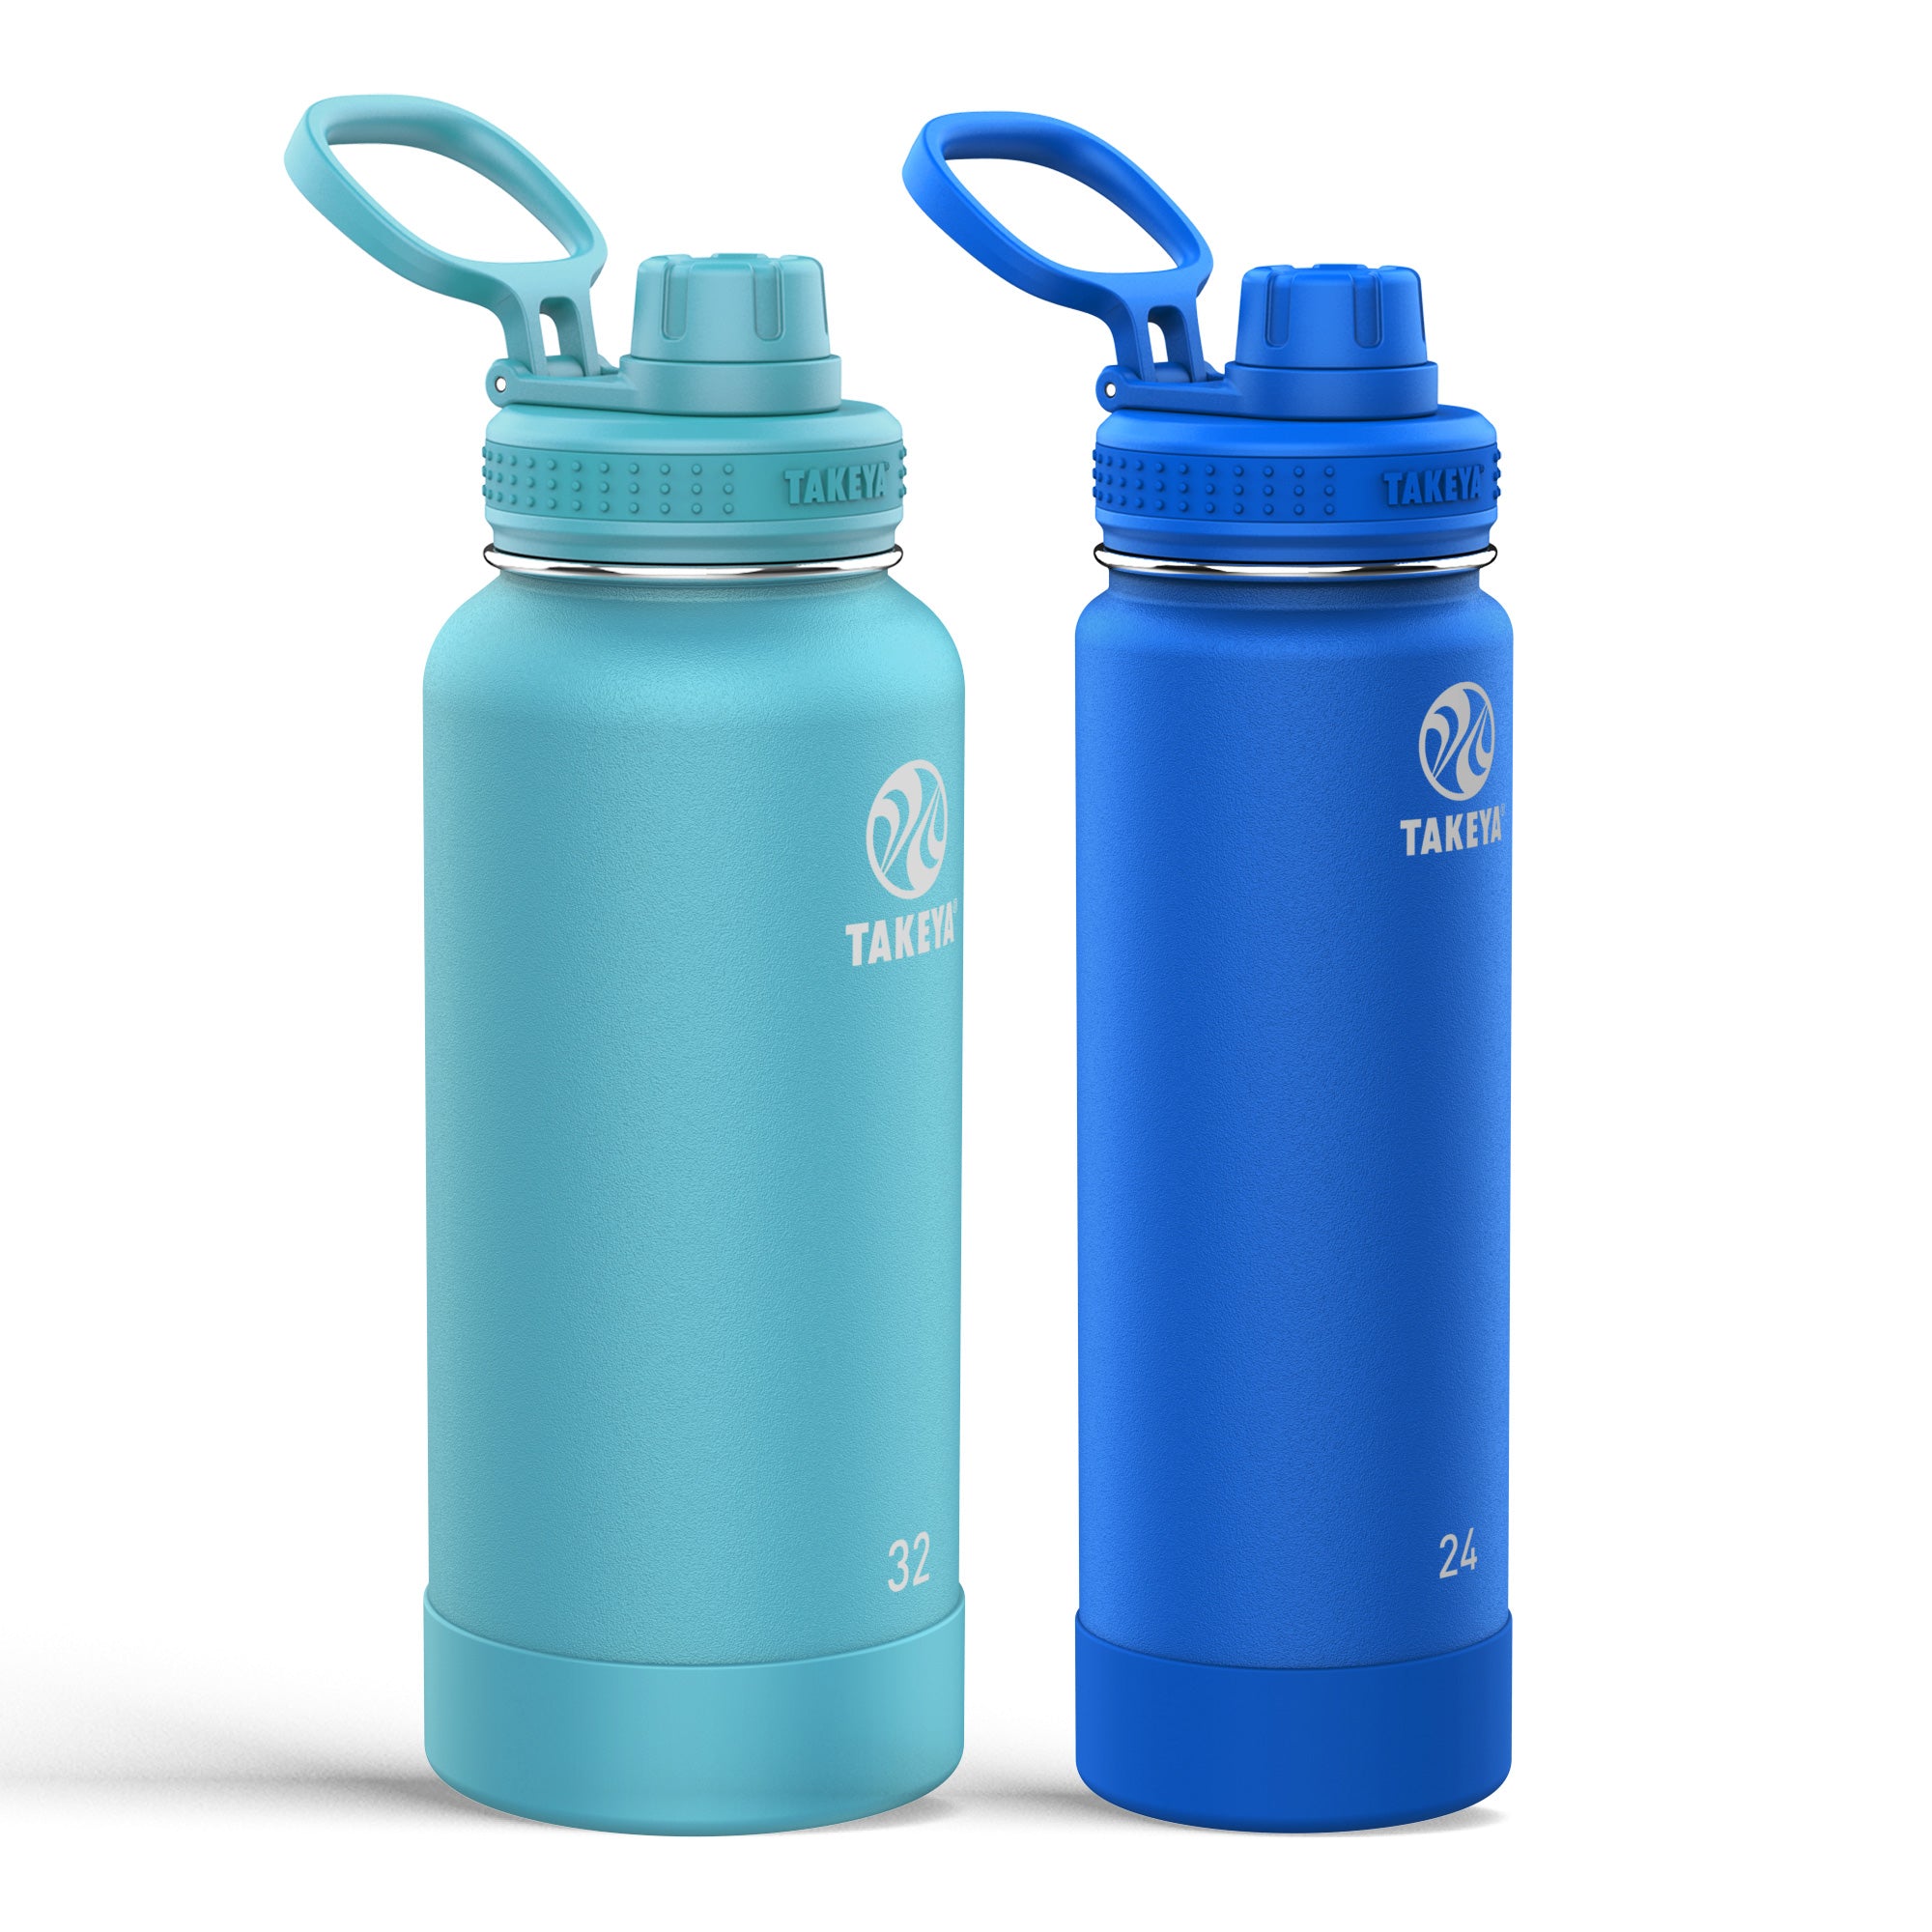 Women's Health - The Best Water Bottle For Every Workout – Takeya USA